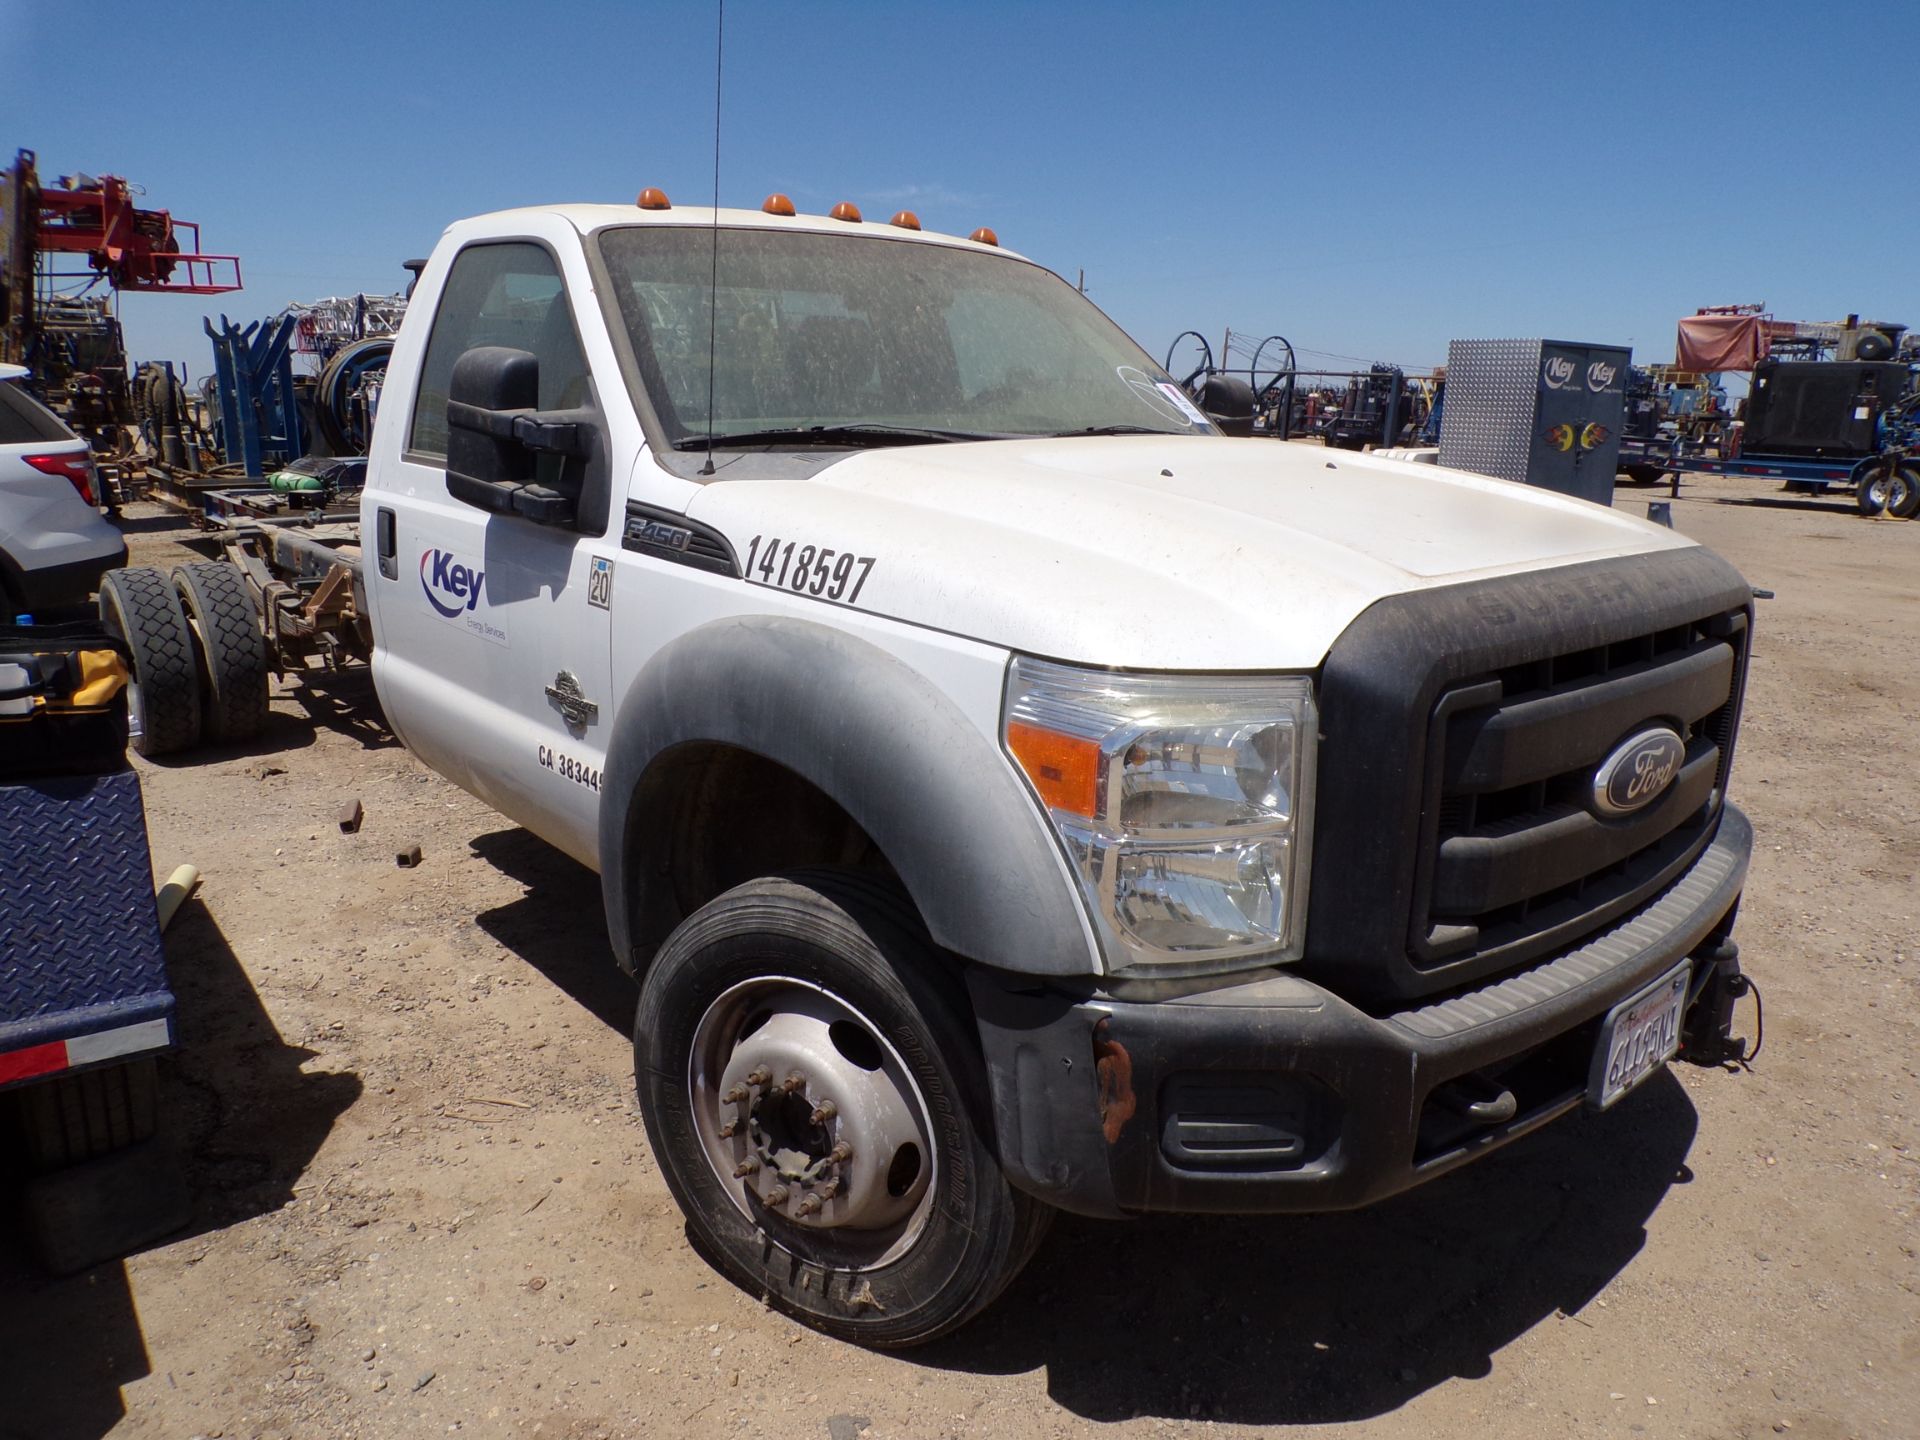 Located in YARD 14 - Bakersfield, CA (1418597) (X) 2012 FORD F450 3X4 STANDARD CAB PICKUP, VIN- - Image 2 of 6